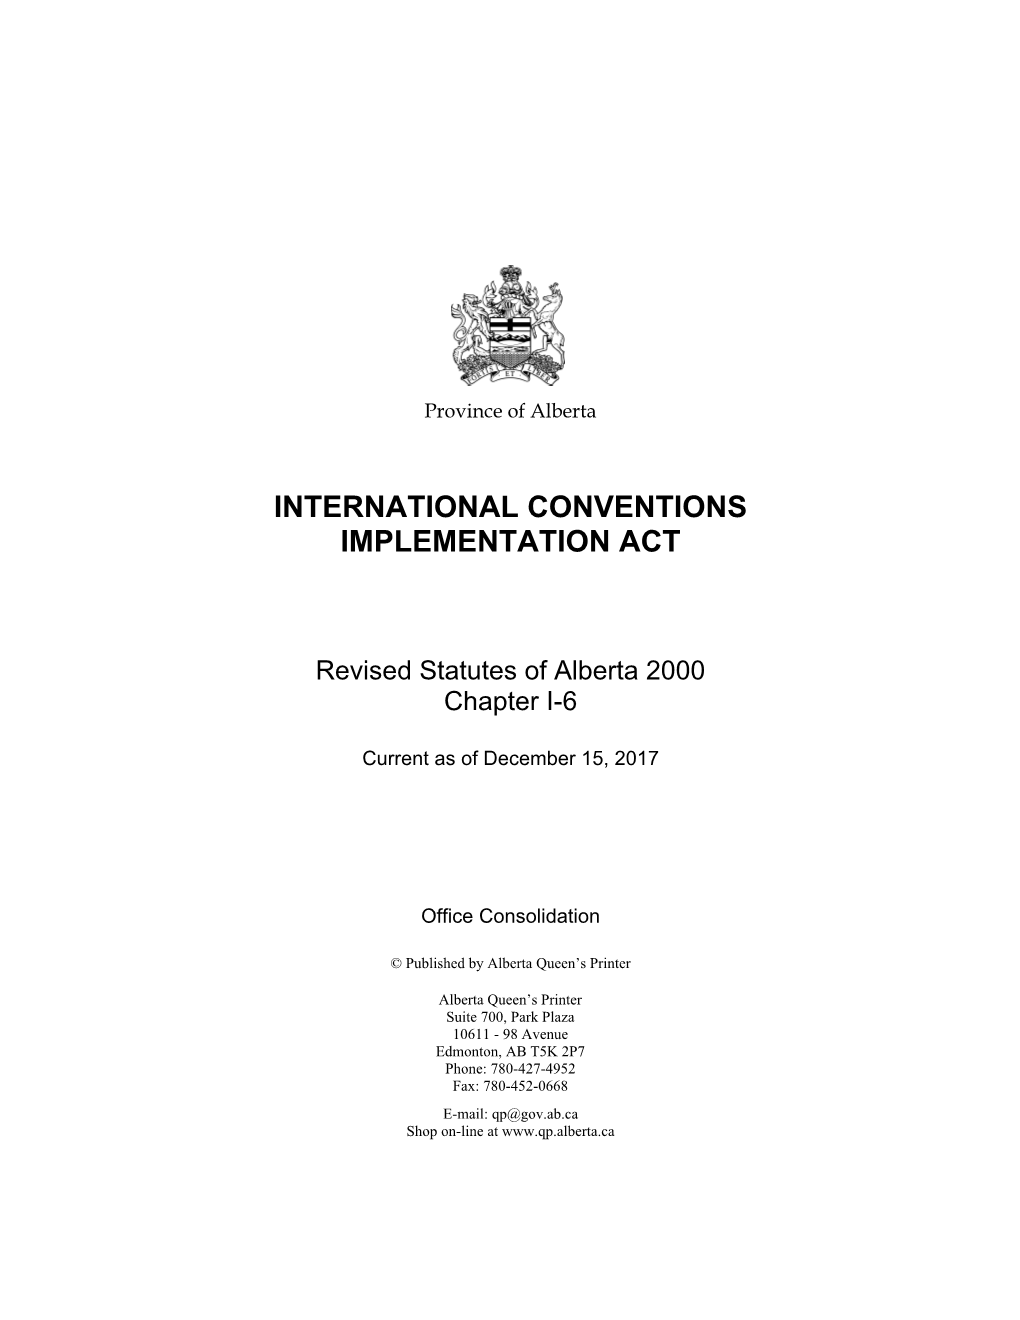 International Conventions Implementation Act